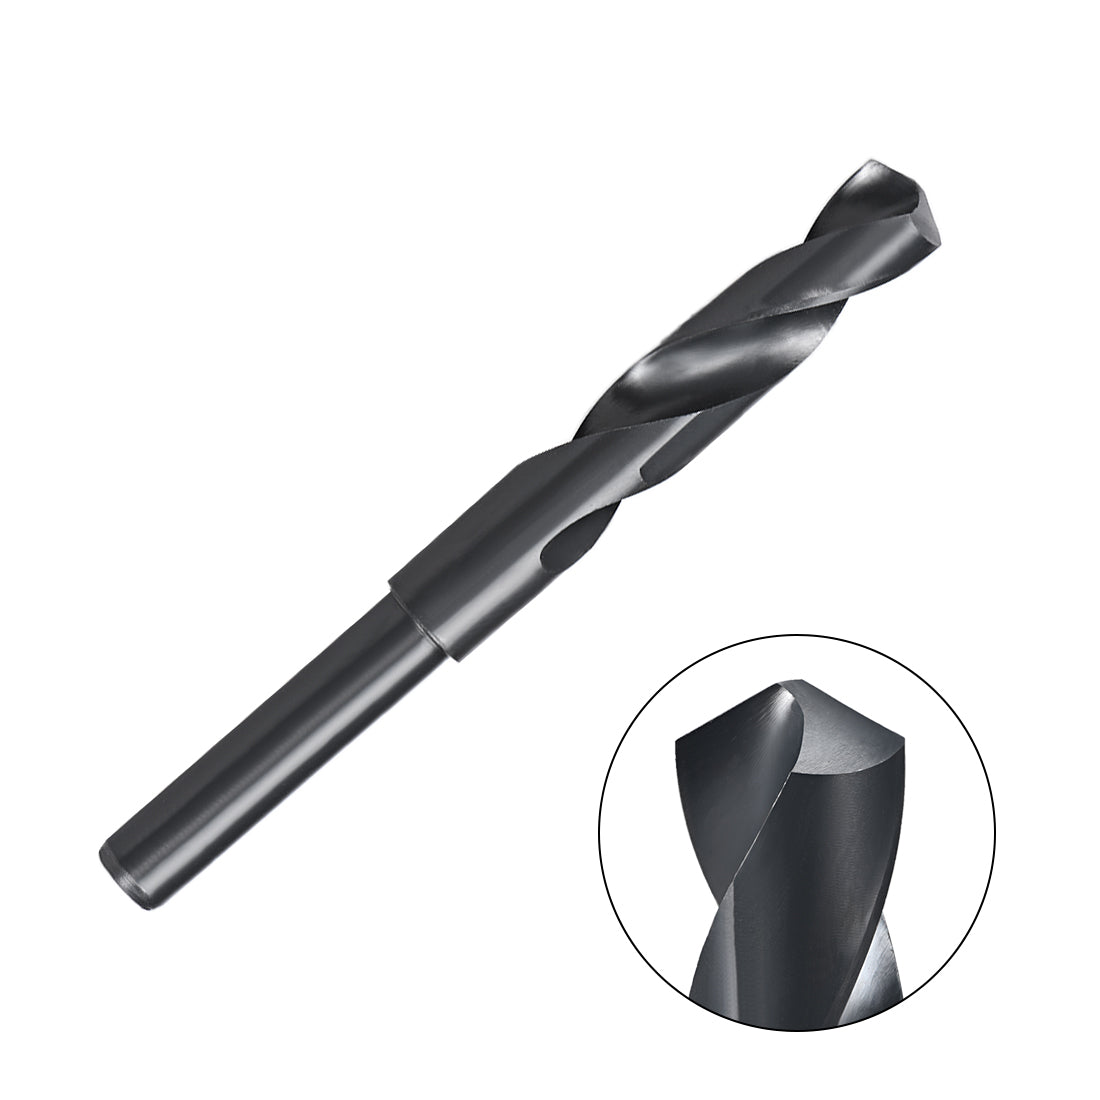 uxcell Uxcell Reduced Shank Drill Bit 16mm HSS 6542 Black Oxide with 1/2 Inch Straight Shank